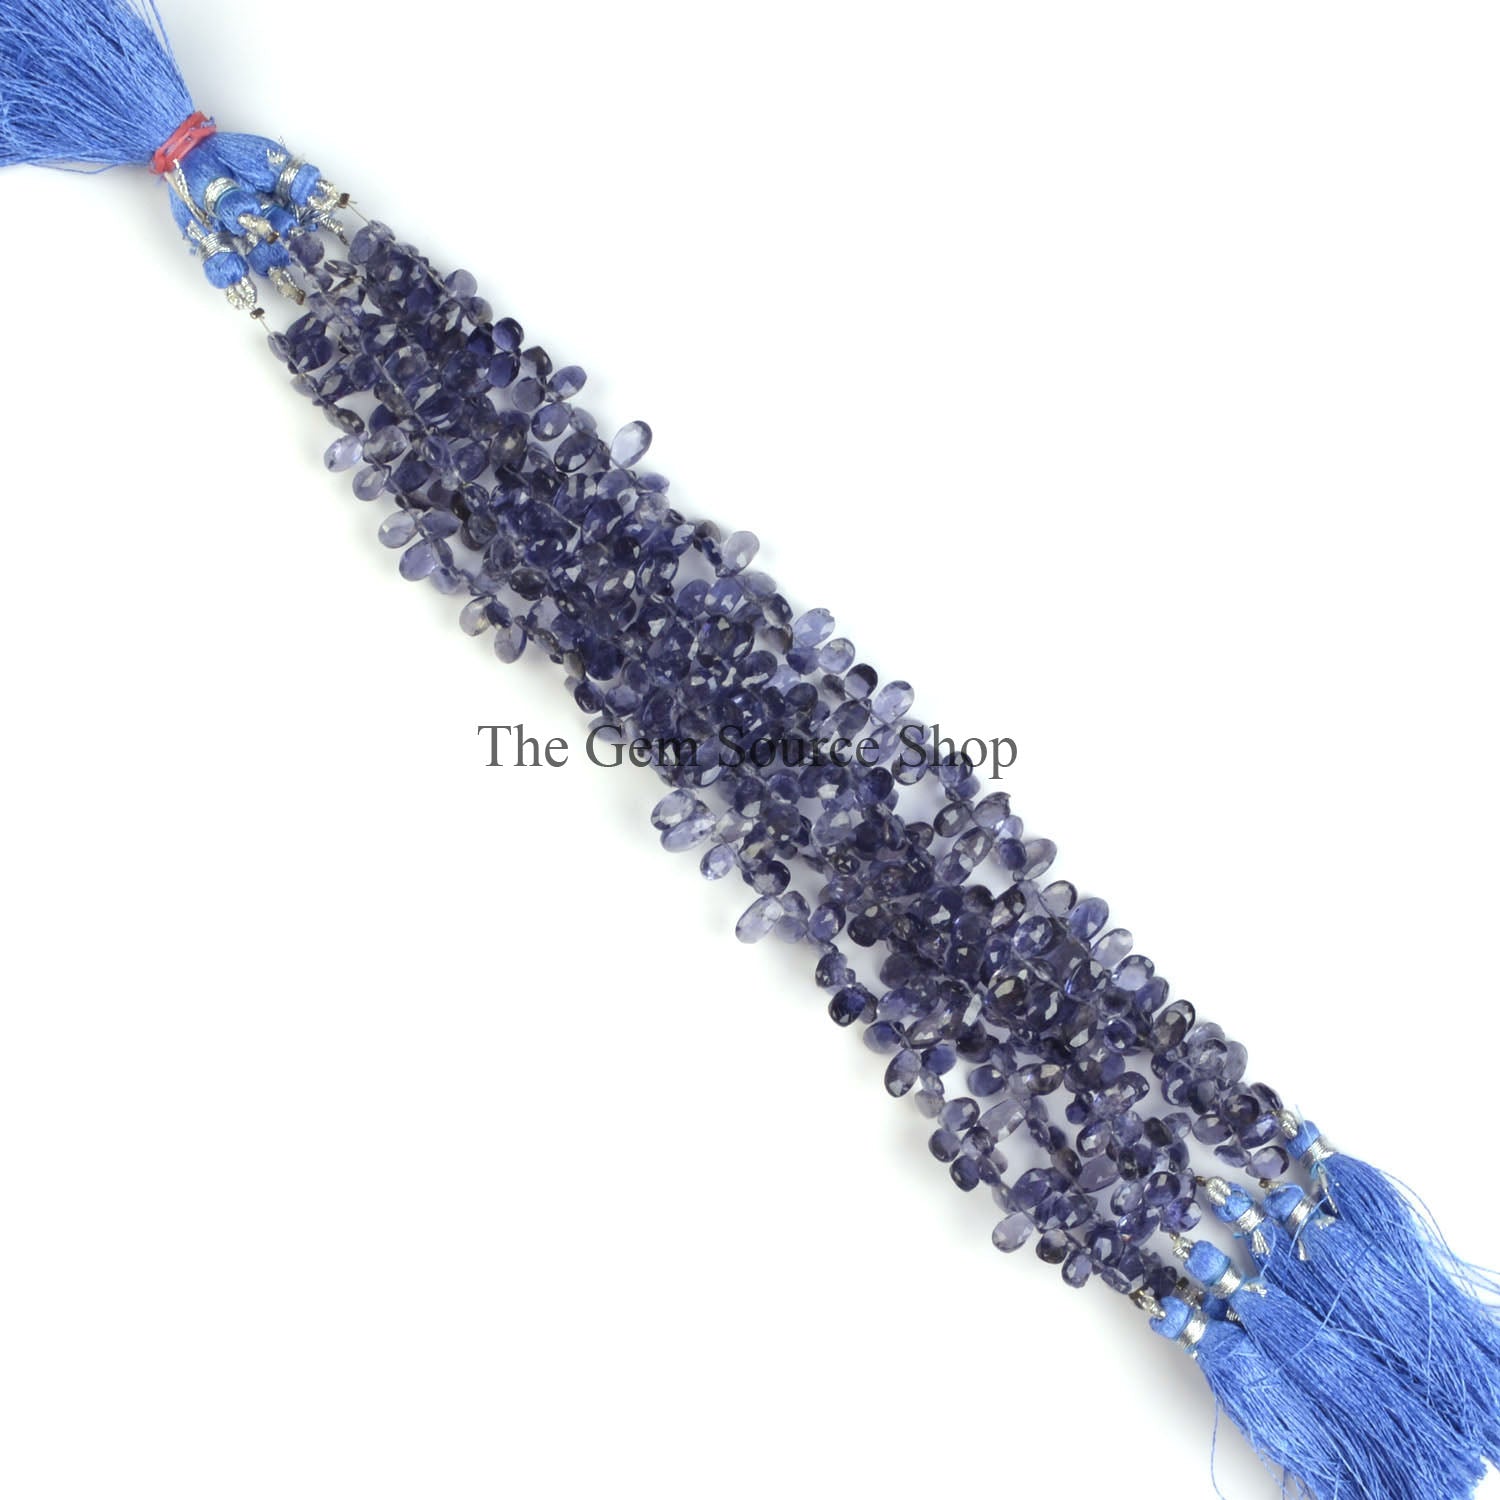 Natural Iolite Beads, Iolite Faceted Beads, Iolite Pear Shape Beads, Wholesale Beads, Beads For Jewelry